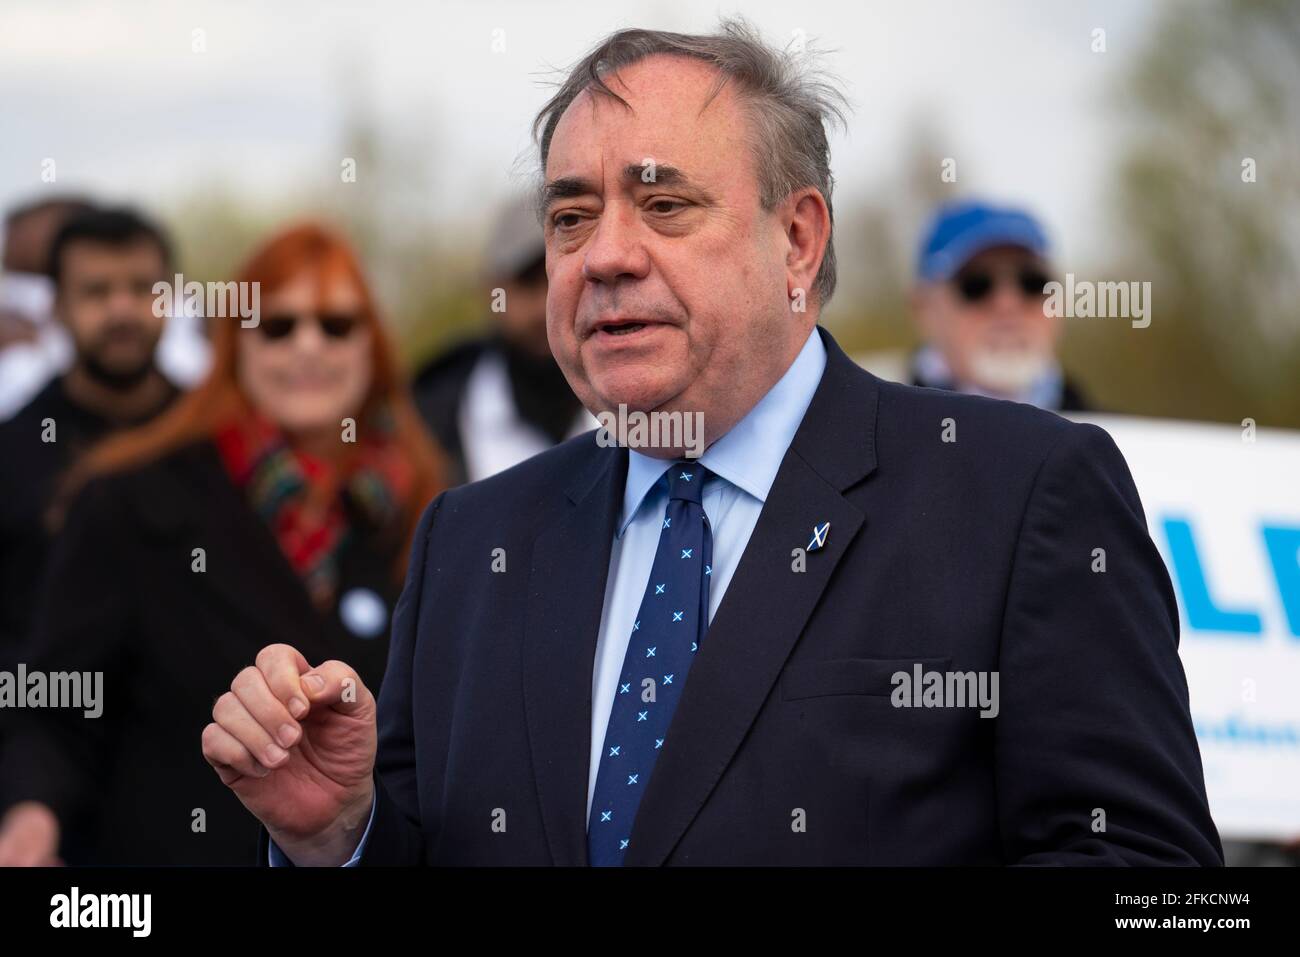 Falkirk, Scotland, UK. 30 April 2021. Leader of the pro Scottish nationalist Alba Party , Alex Salmond, campaigns with party supporters at the Falkirk Wheel ahead of Scottish elections on May 6th.  Iain Masterton/Alamy Live News Stock Photo